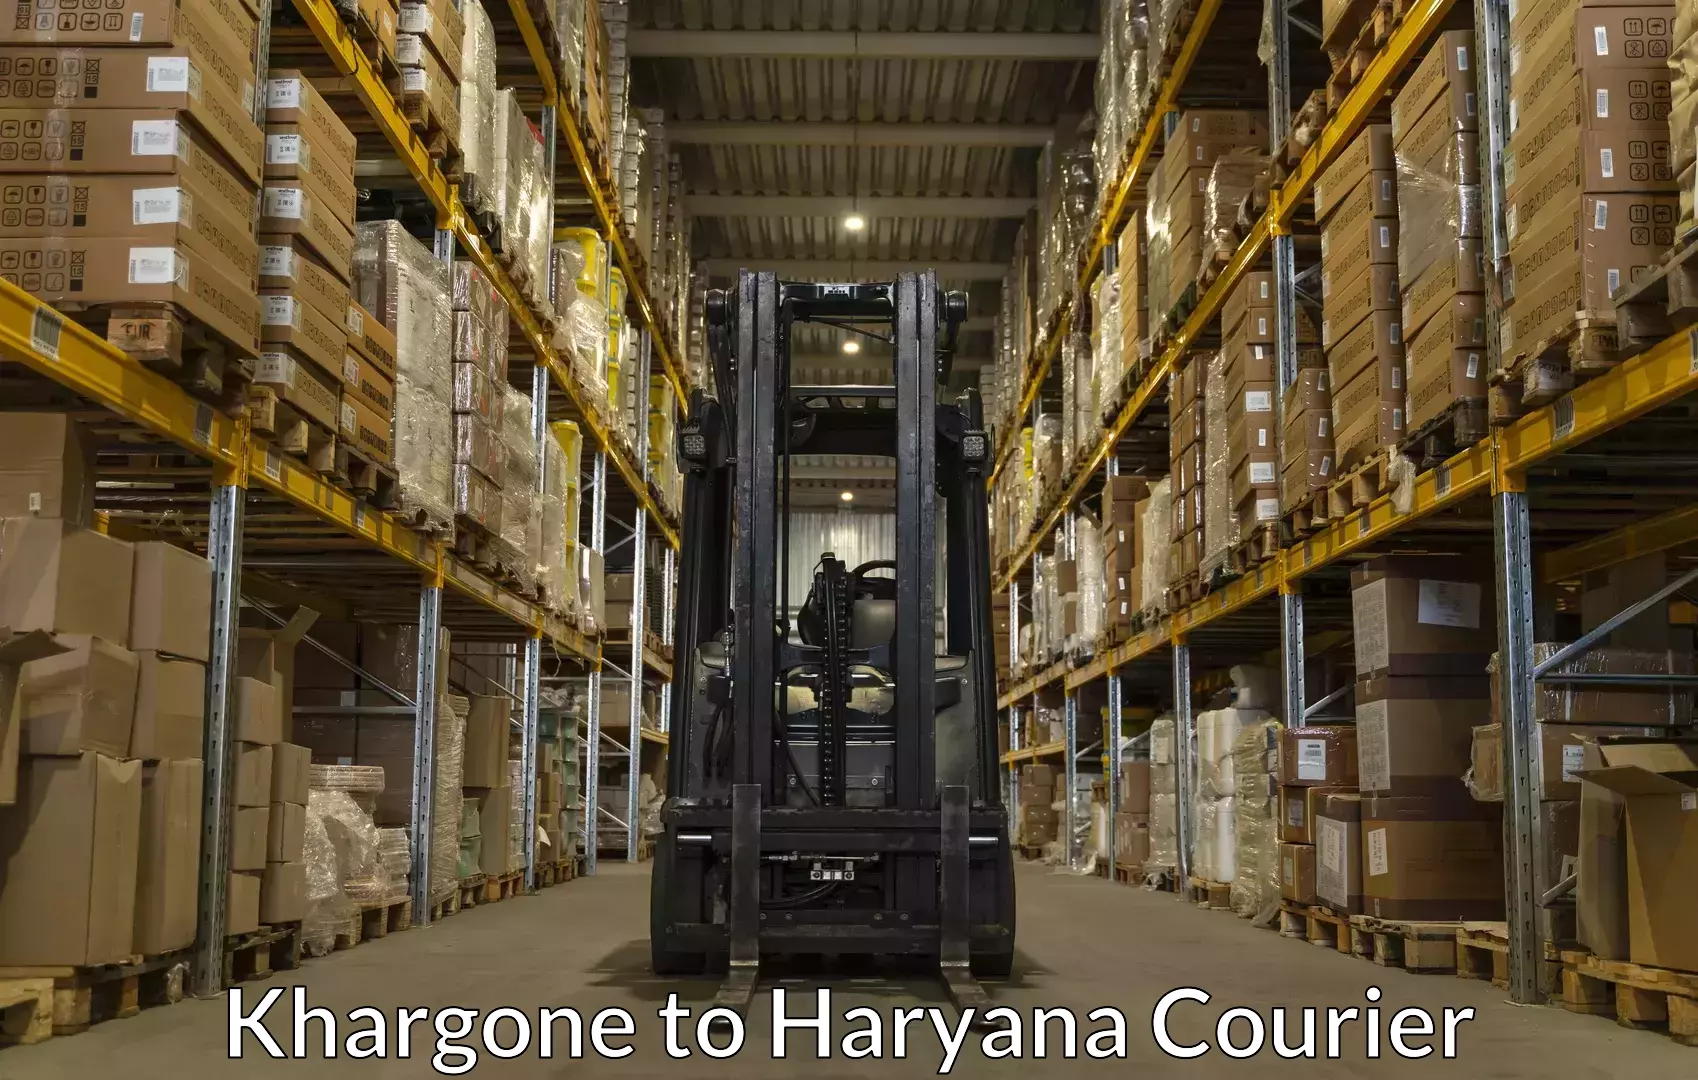 Luggage transport consultancy Khargone to Chaudhary Charan Singh Haryana Agricultural University Hisar